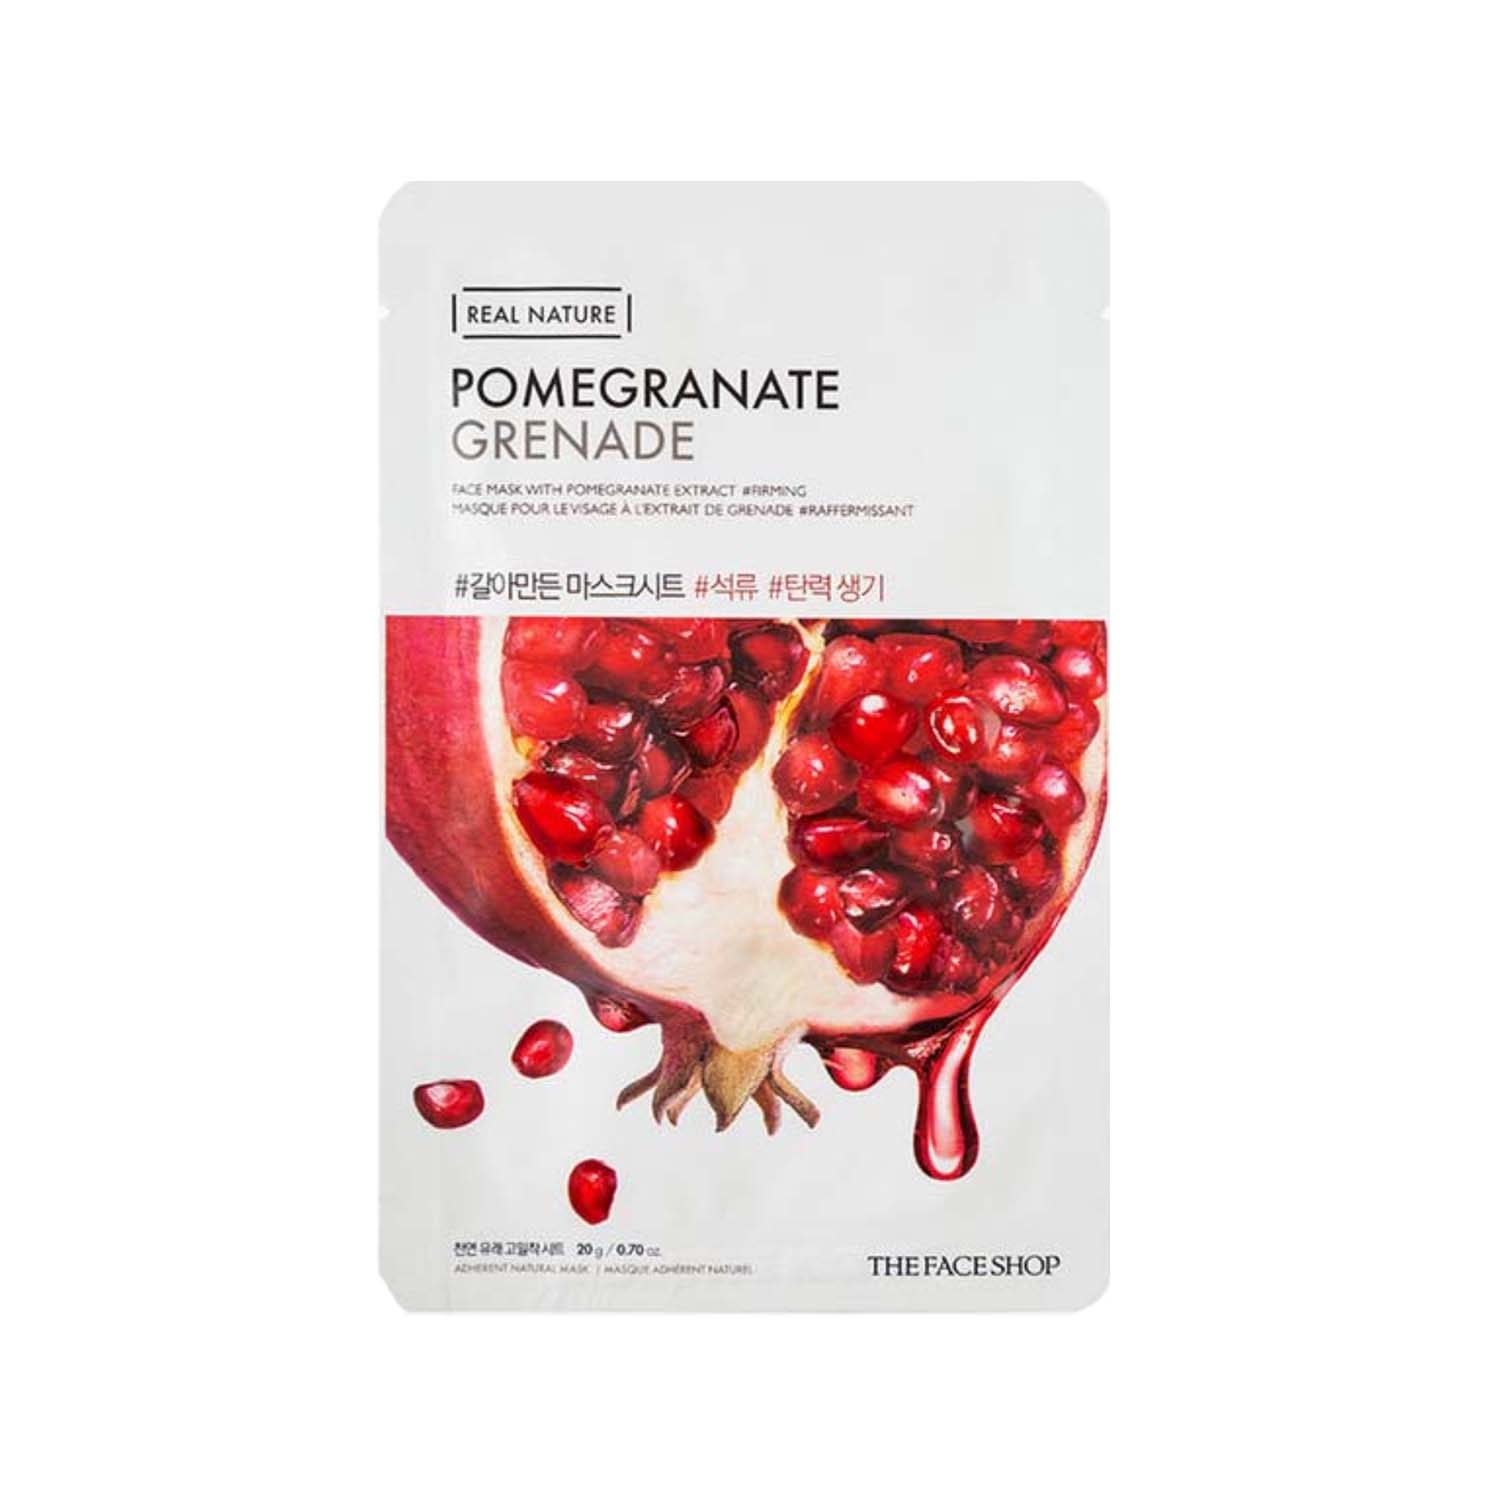 The Face Shop | The Face Shop Real Nature Pomegranate Face Sheet Mask (20g)